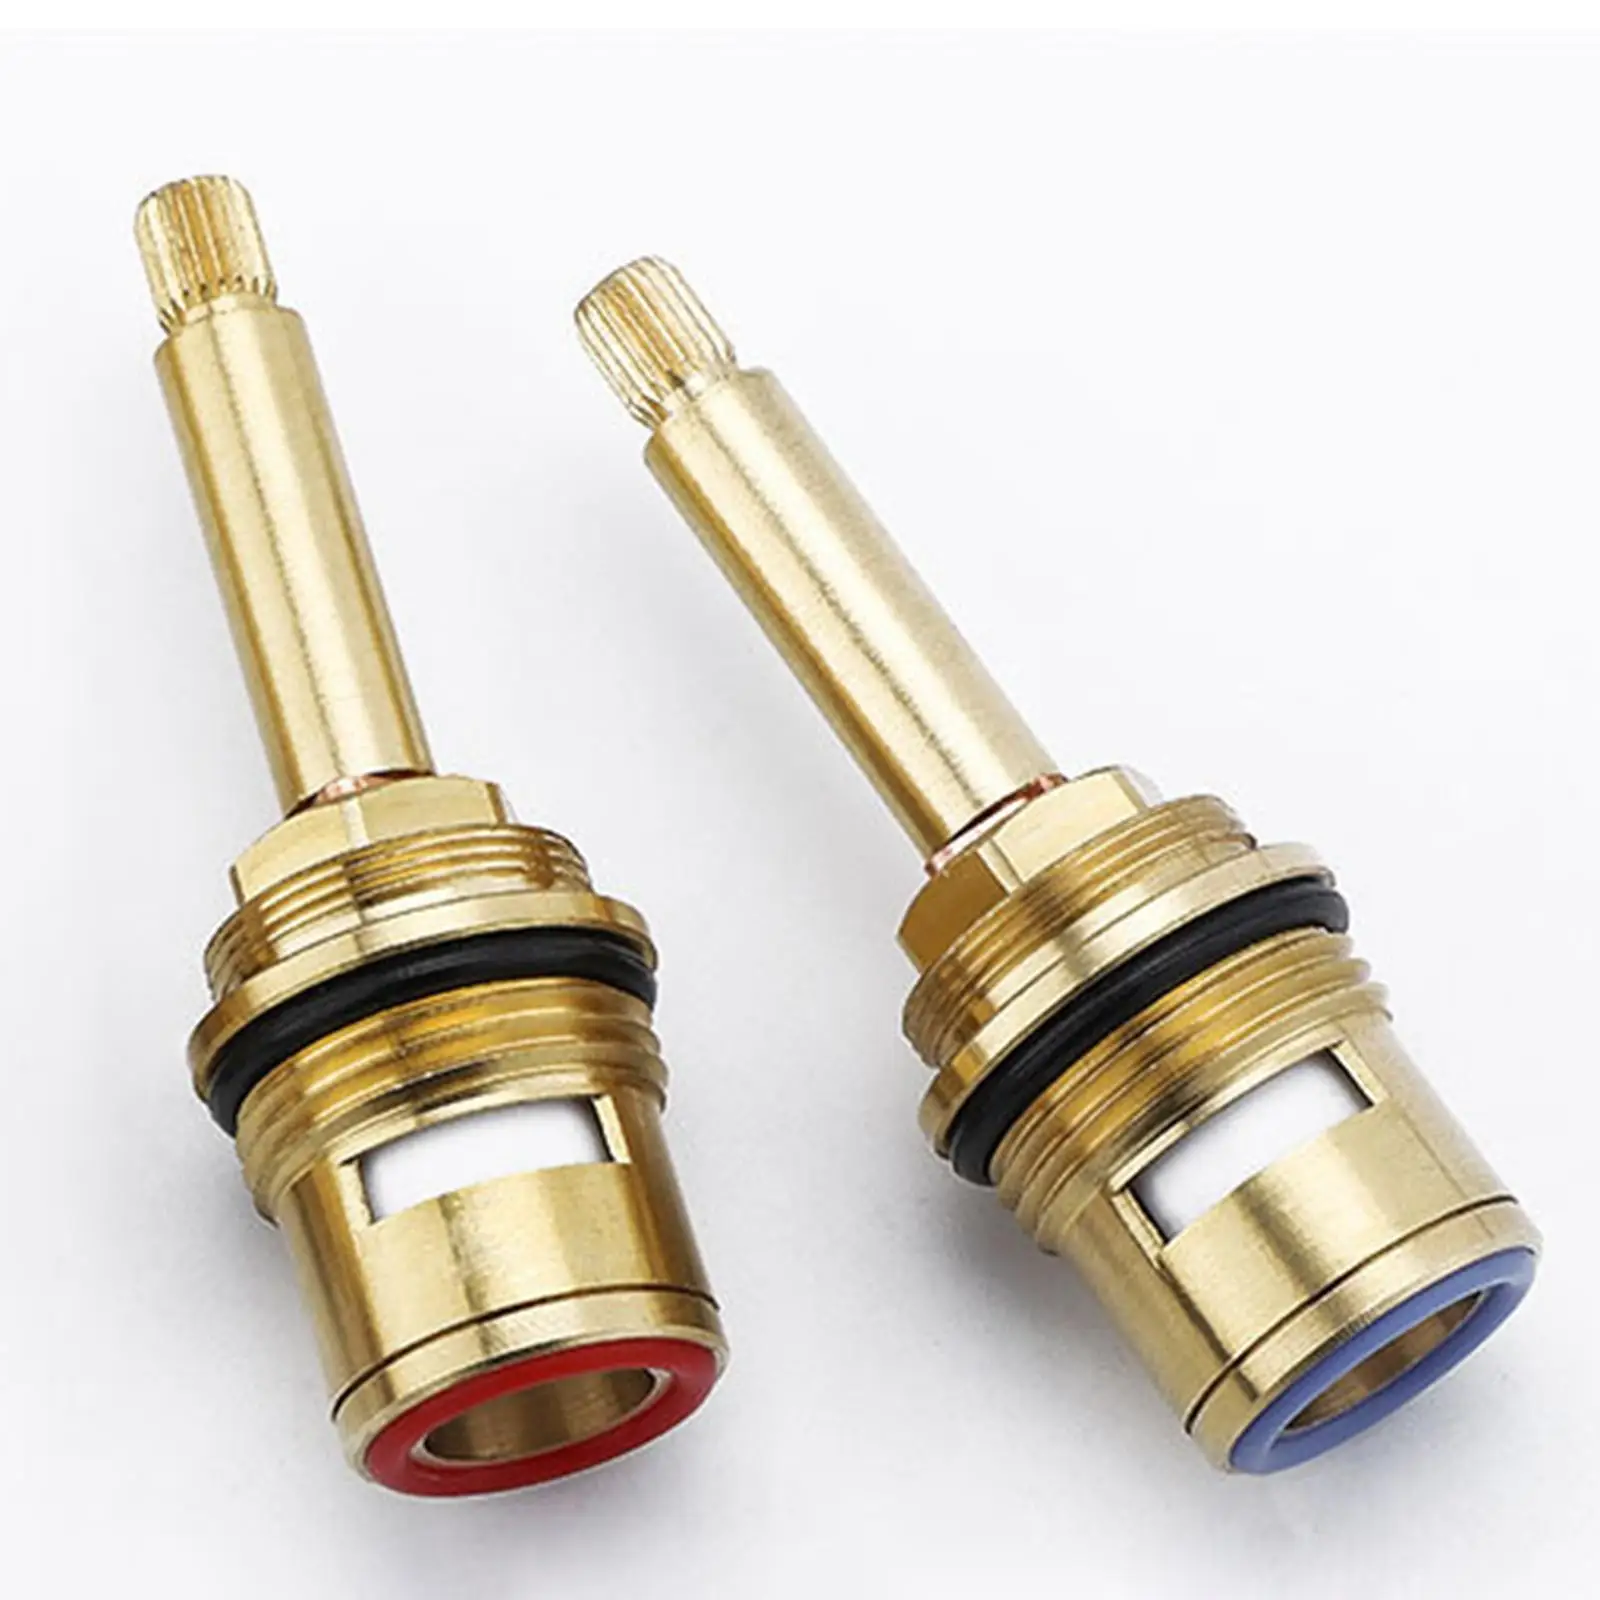 

Faucet Valves Replacement Wear Resistant Brass Ceramic Stem Disc Cartridges for Laundry Hot Cold Water Washroom Basin Tap Shower